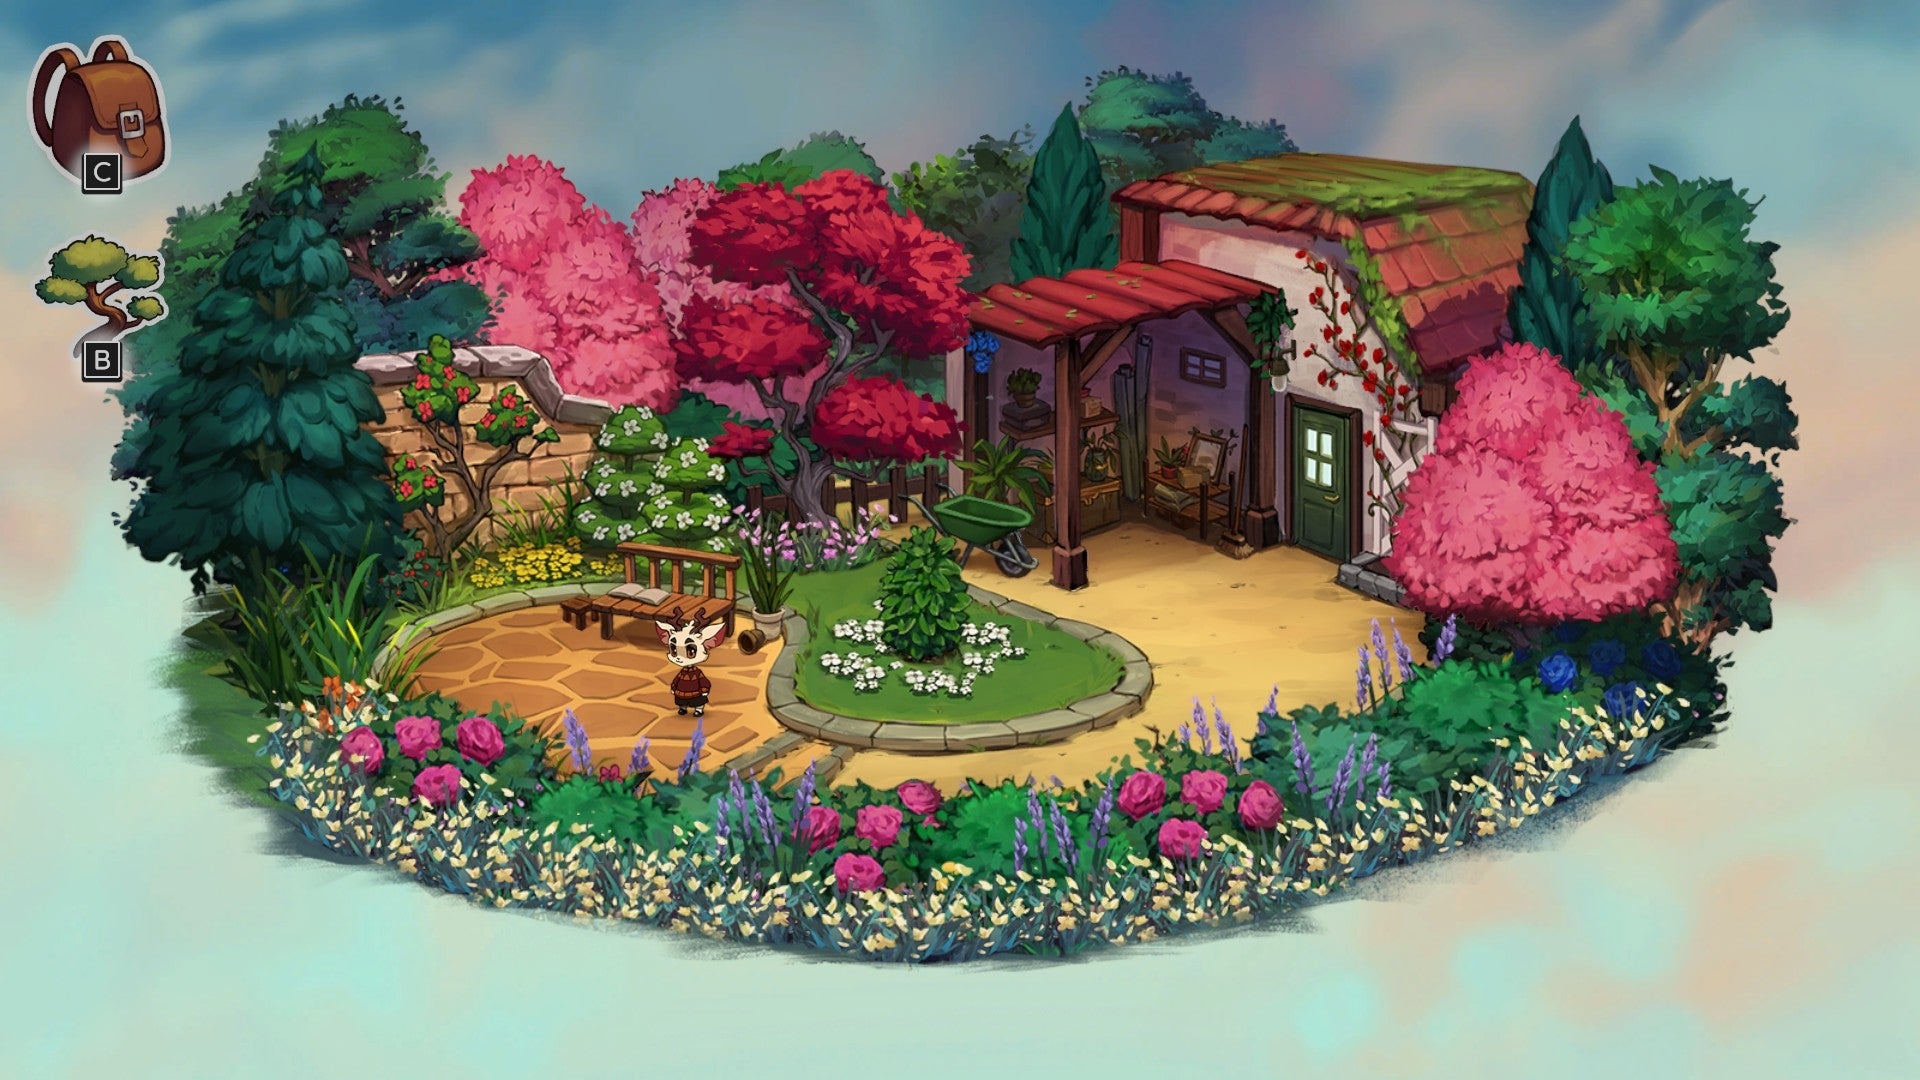 The location artwork is lush as heck in Beacon Pines. This is main character Luka's garden.